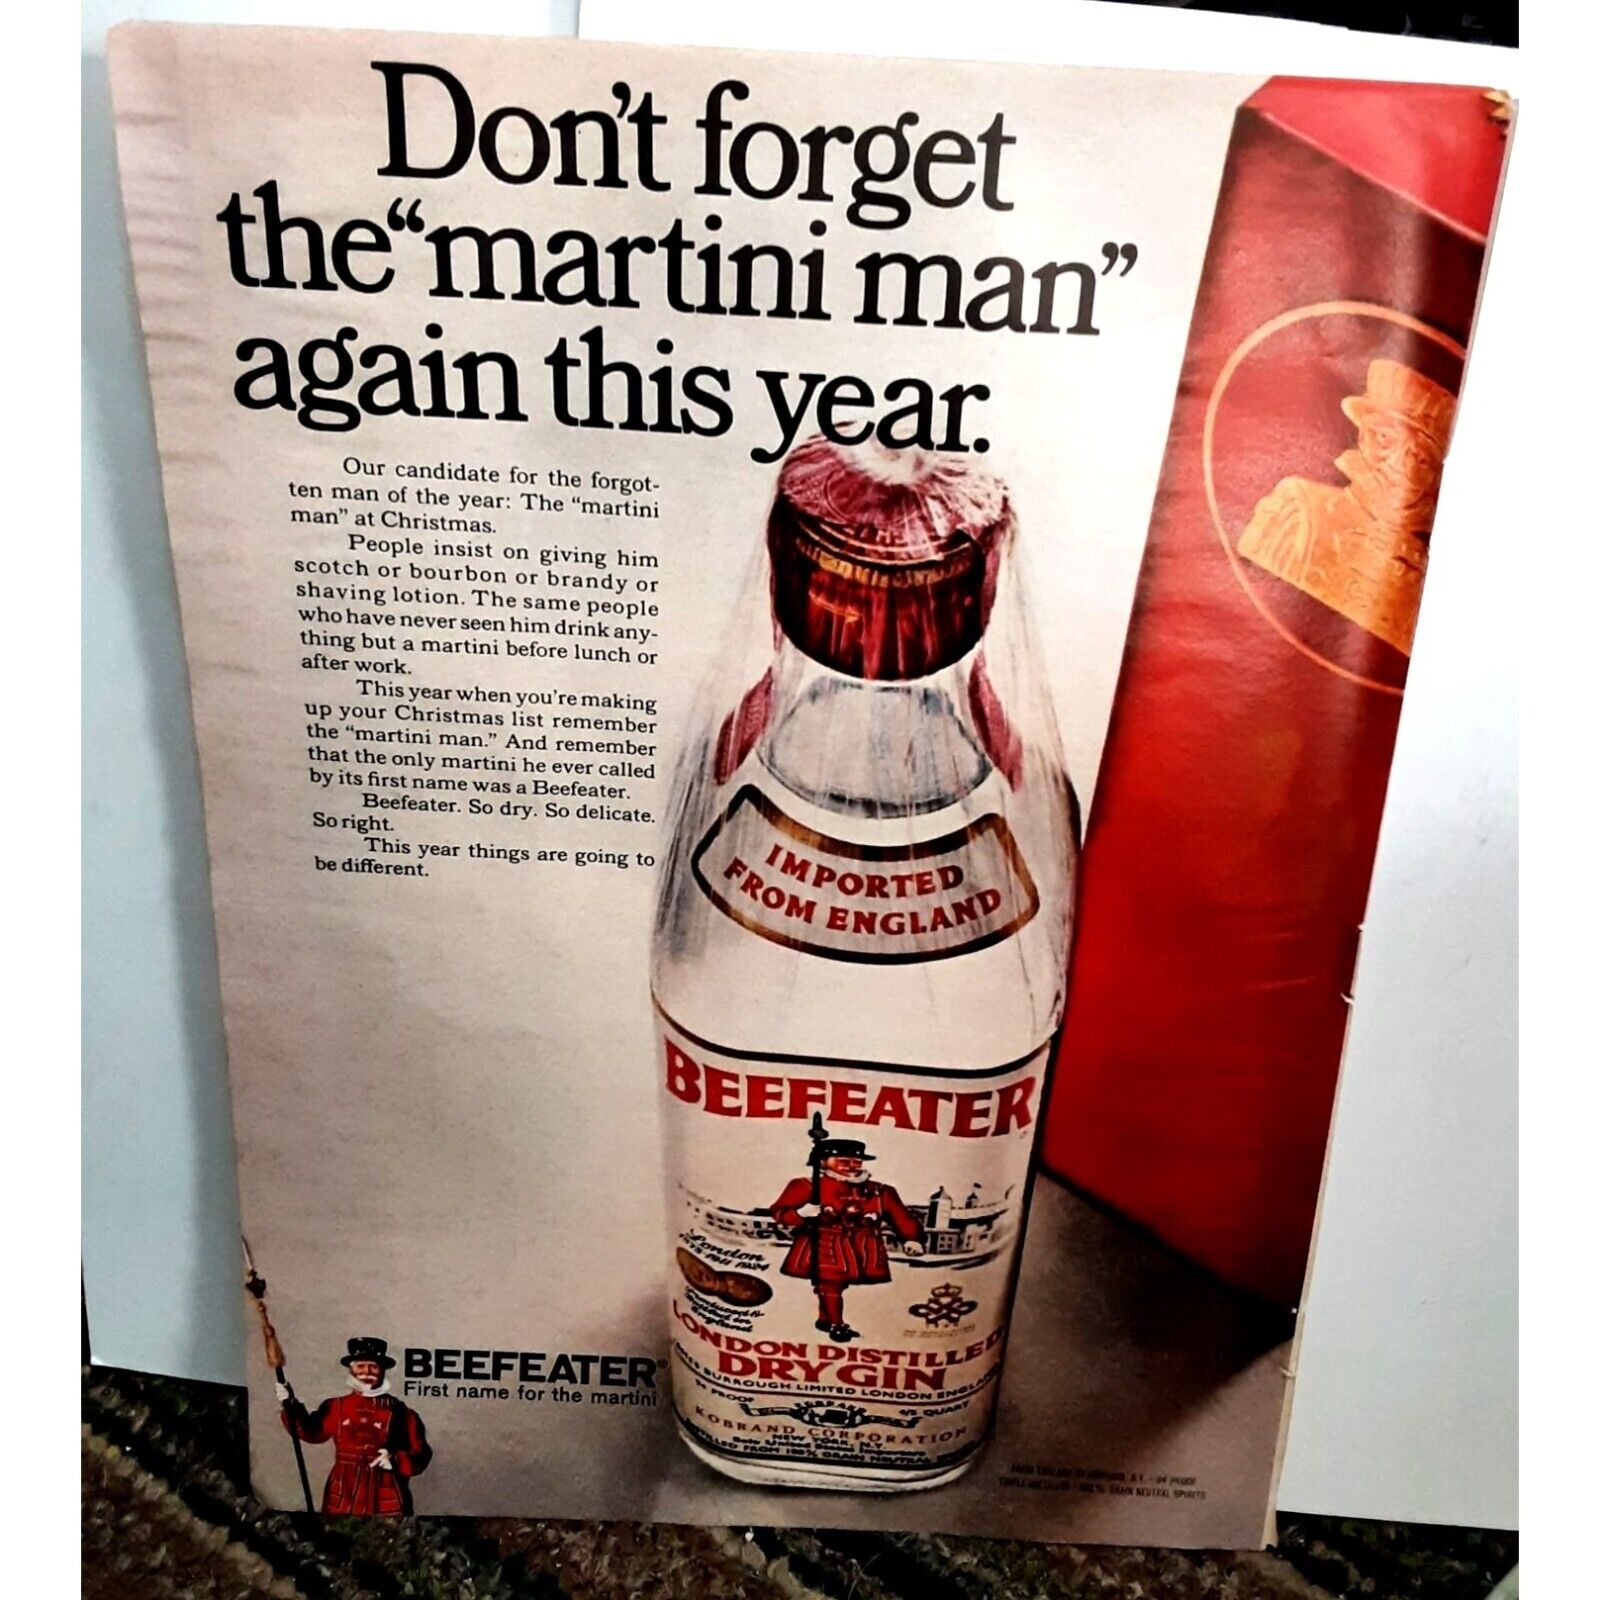 1968 Beefeater London Dry Gin Vintage Print Ad 60s Original